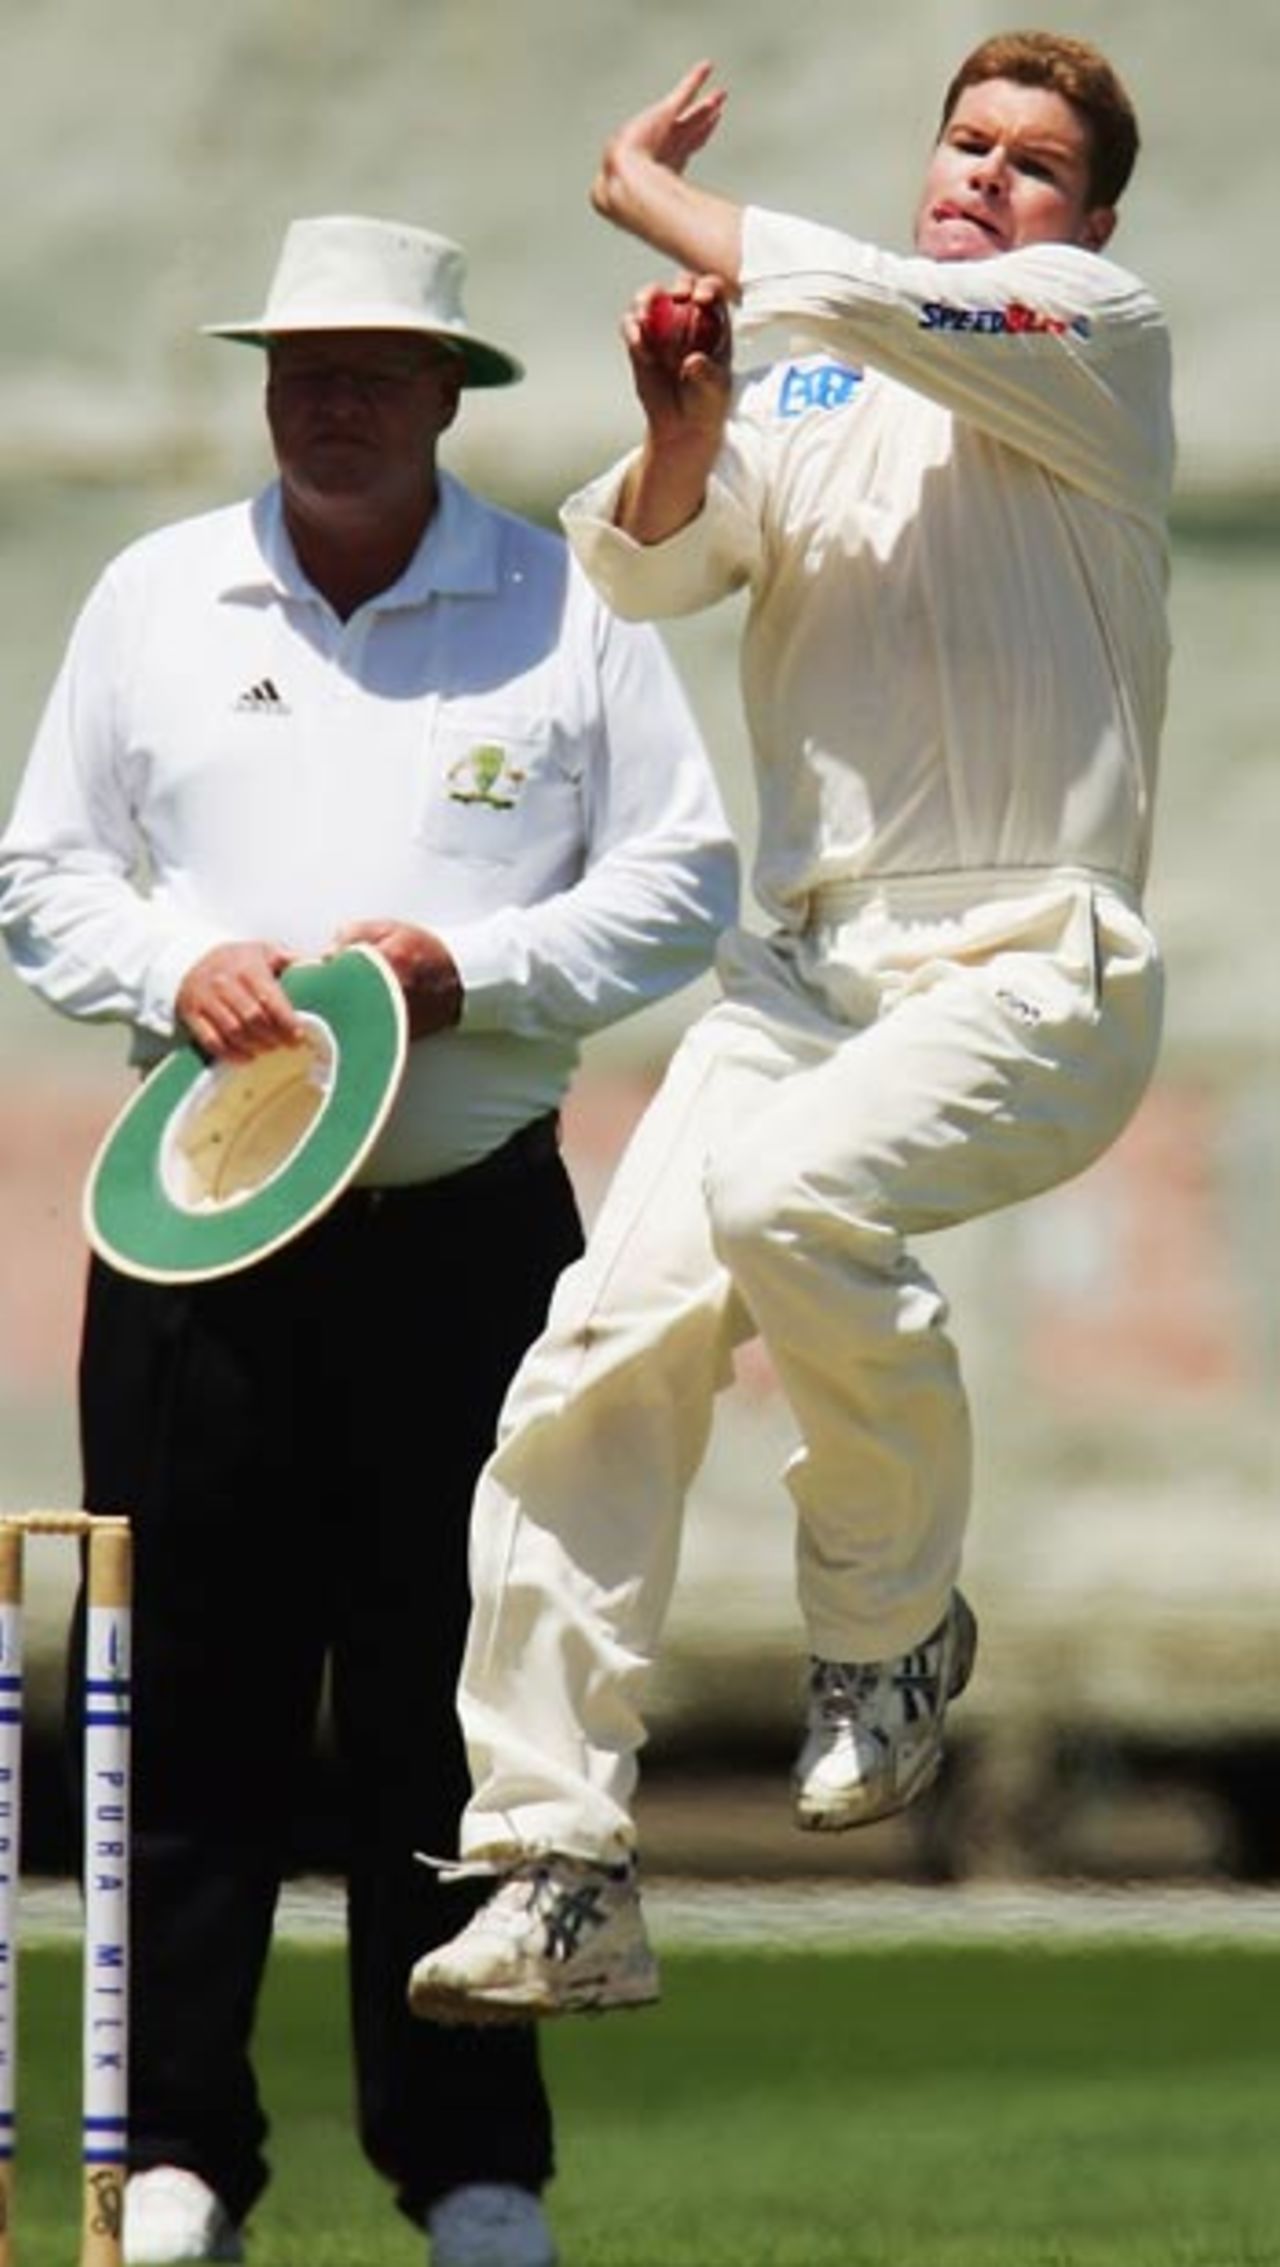 Grant Lambert on his way to a four-wicket haul in a Pura Cup game, Victoria v New South Wales, Melbourne, December 9, 2005